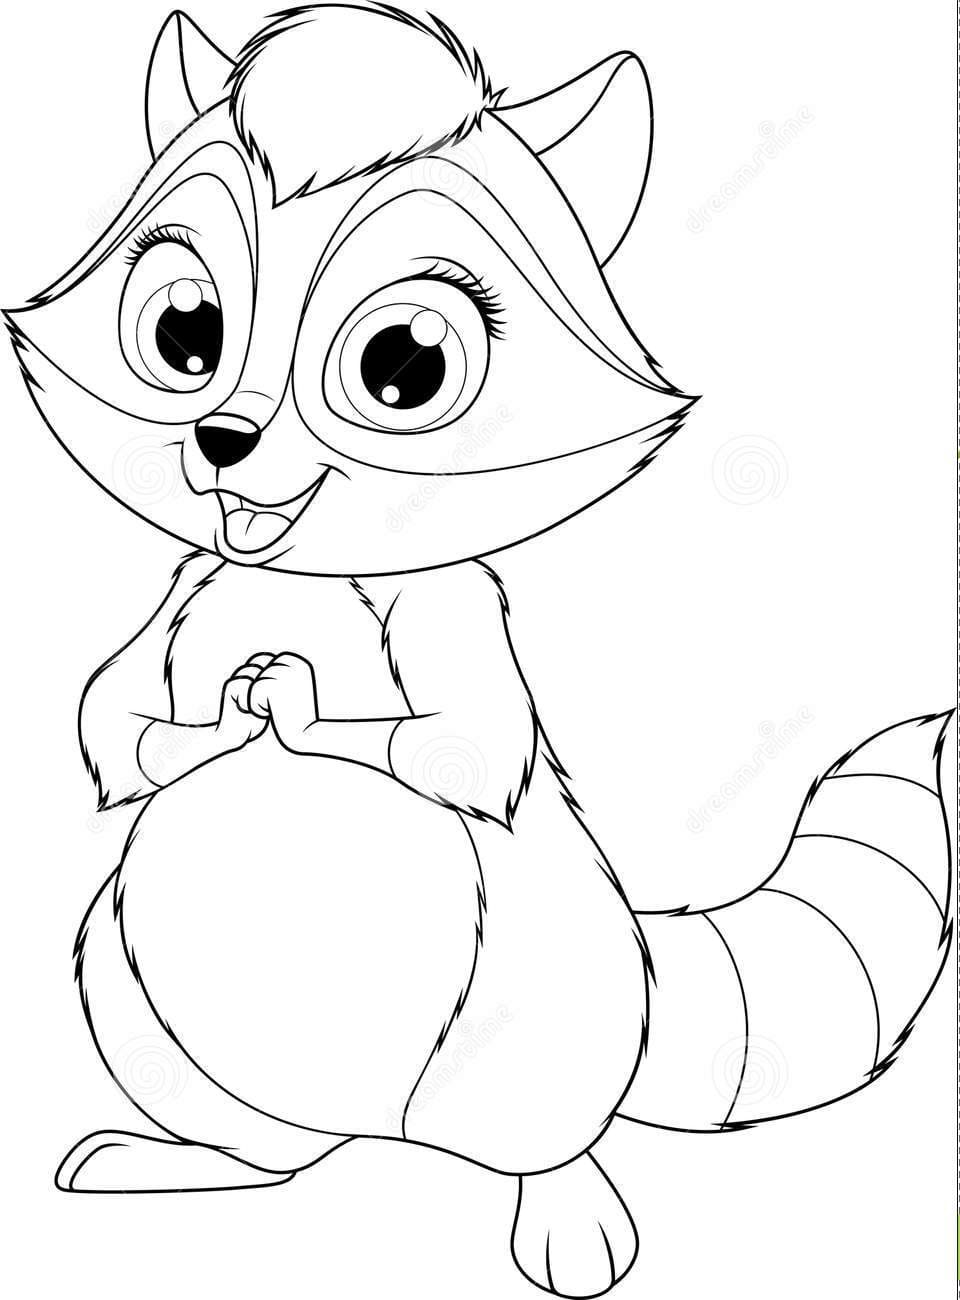 Funny Little Raccoon Coloring Page